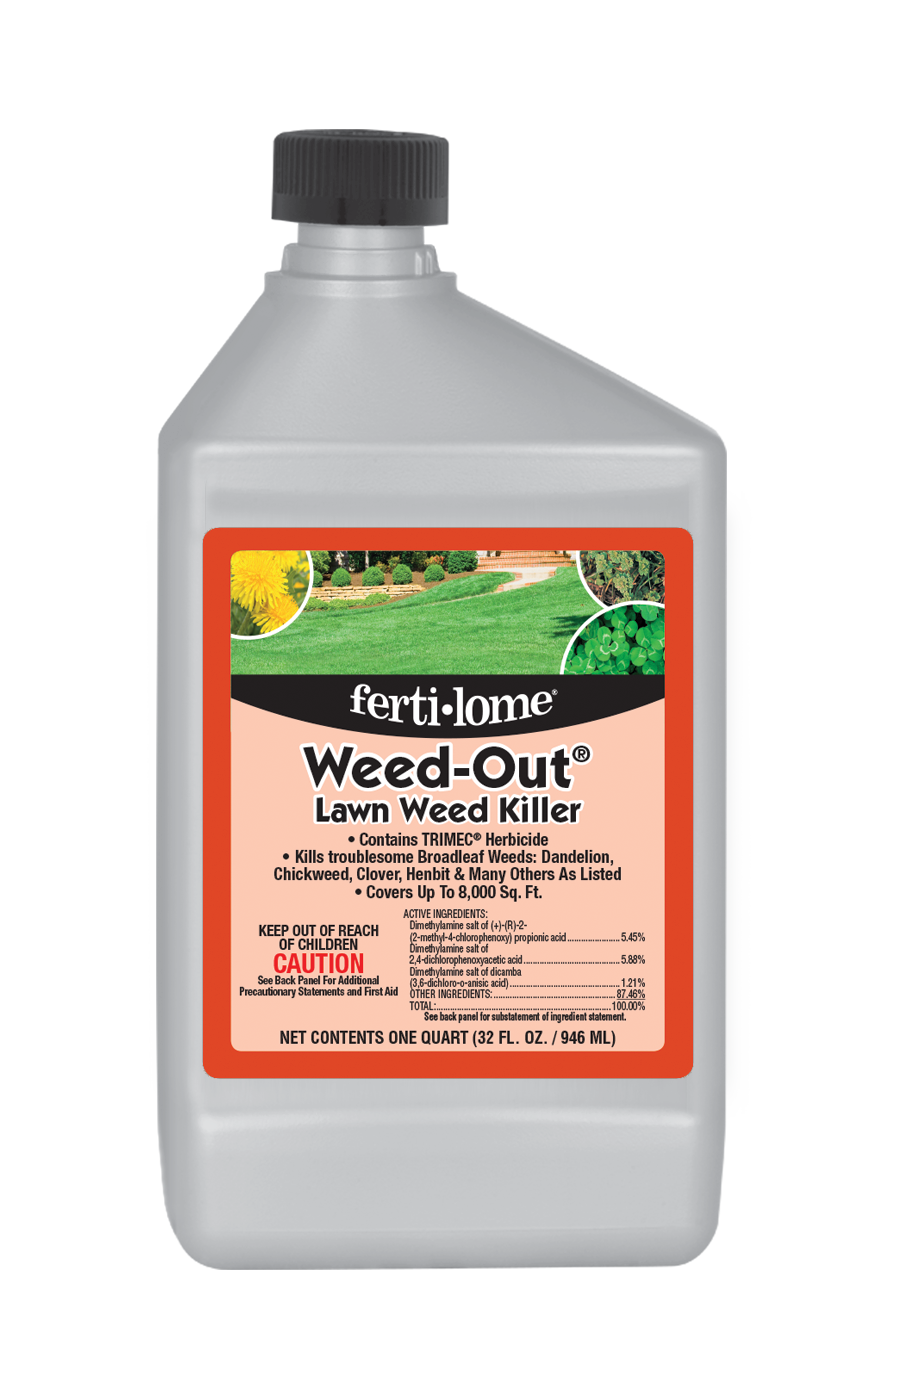 Fertilome, Weed-Out Lawn Weed // Killer concentrate